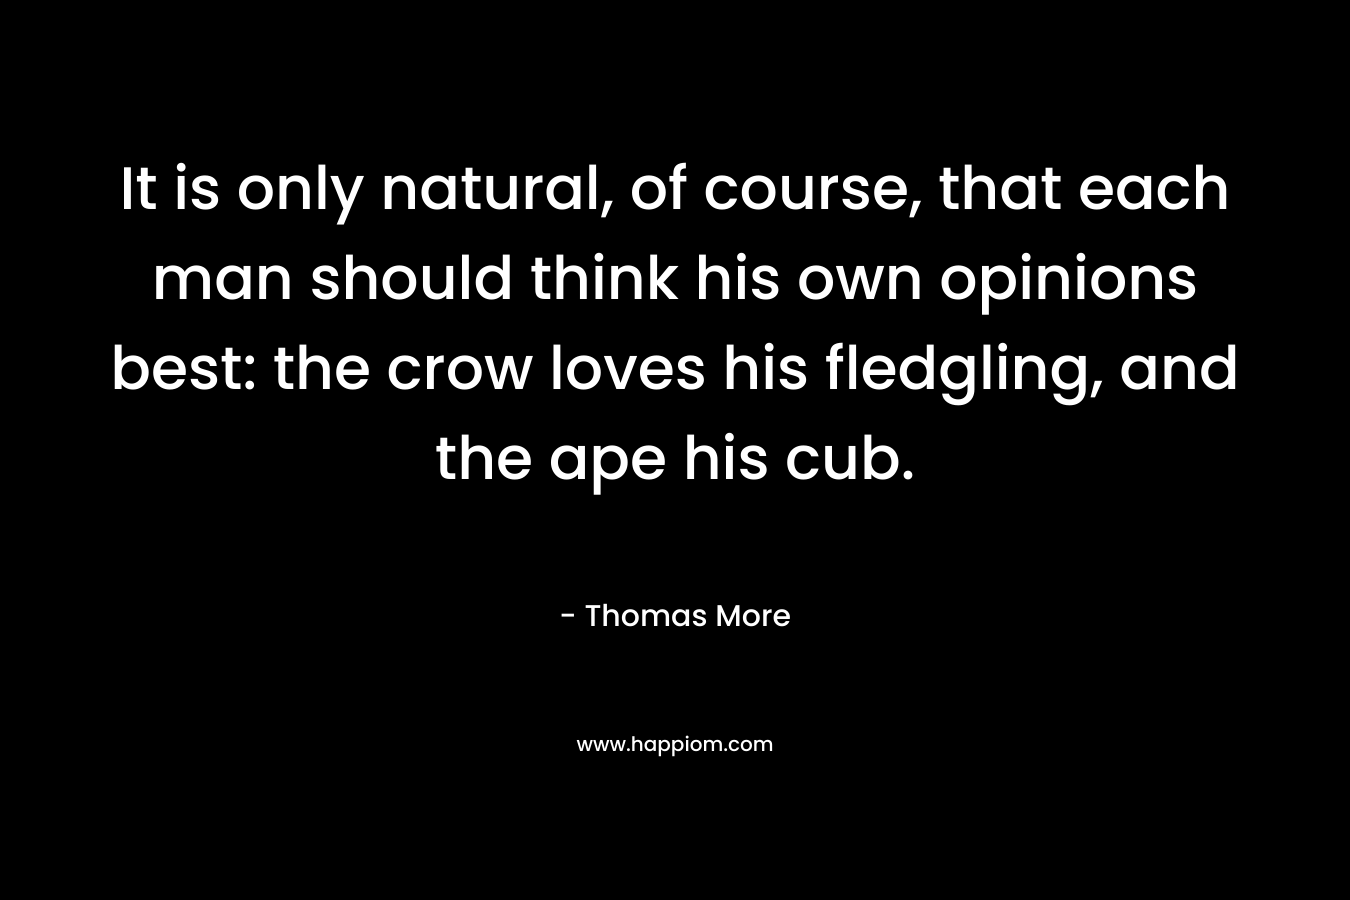 It is only natural, of course, that each man should think his own opinions best: the crow loves his fledgling, and the ape his cub.